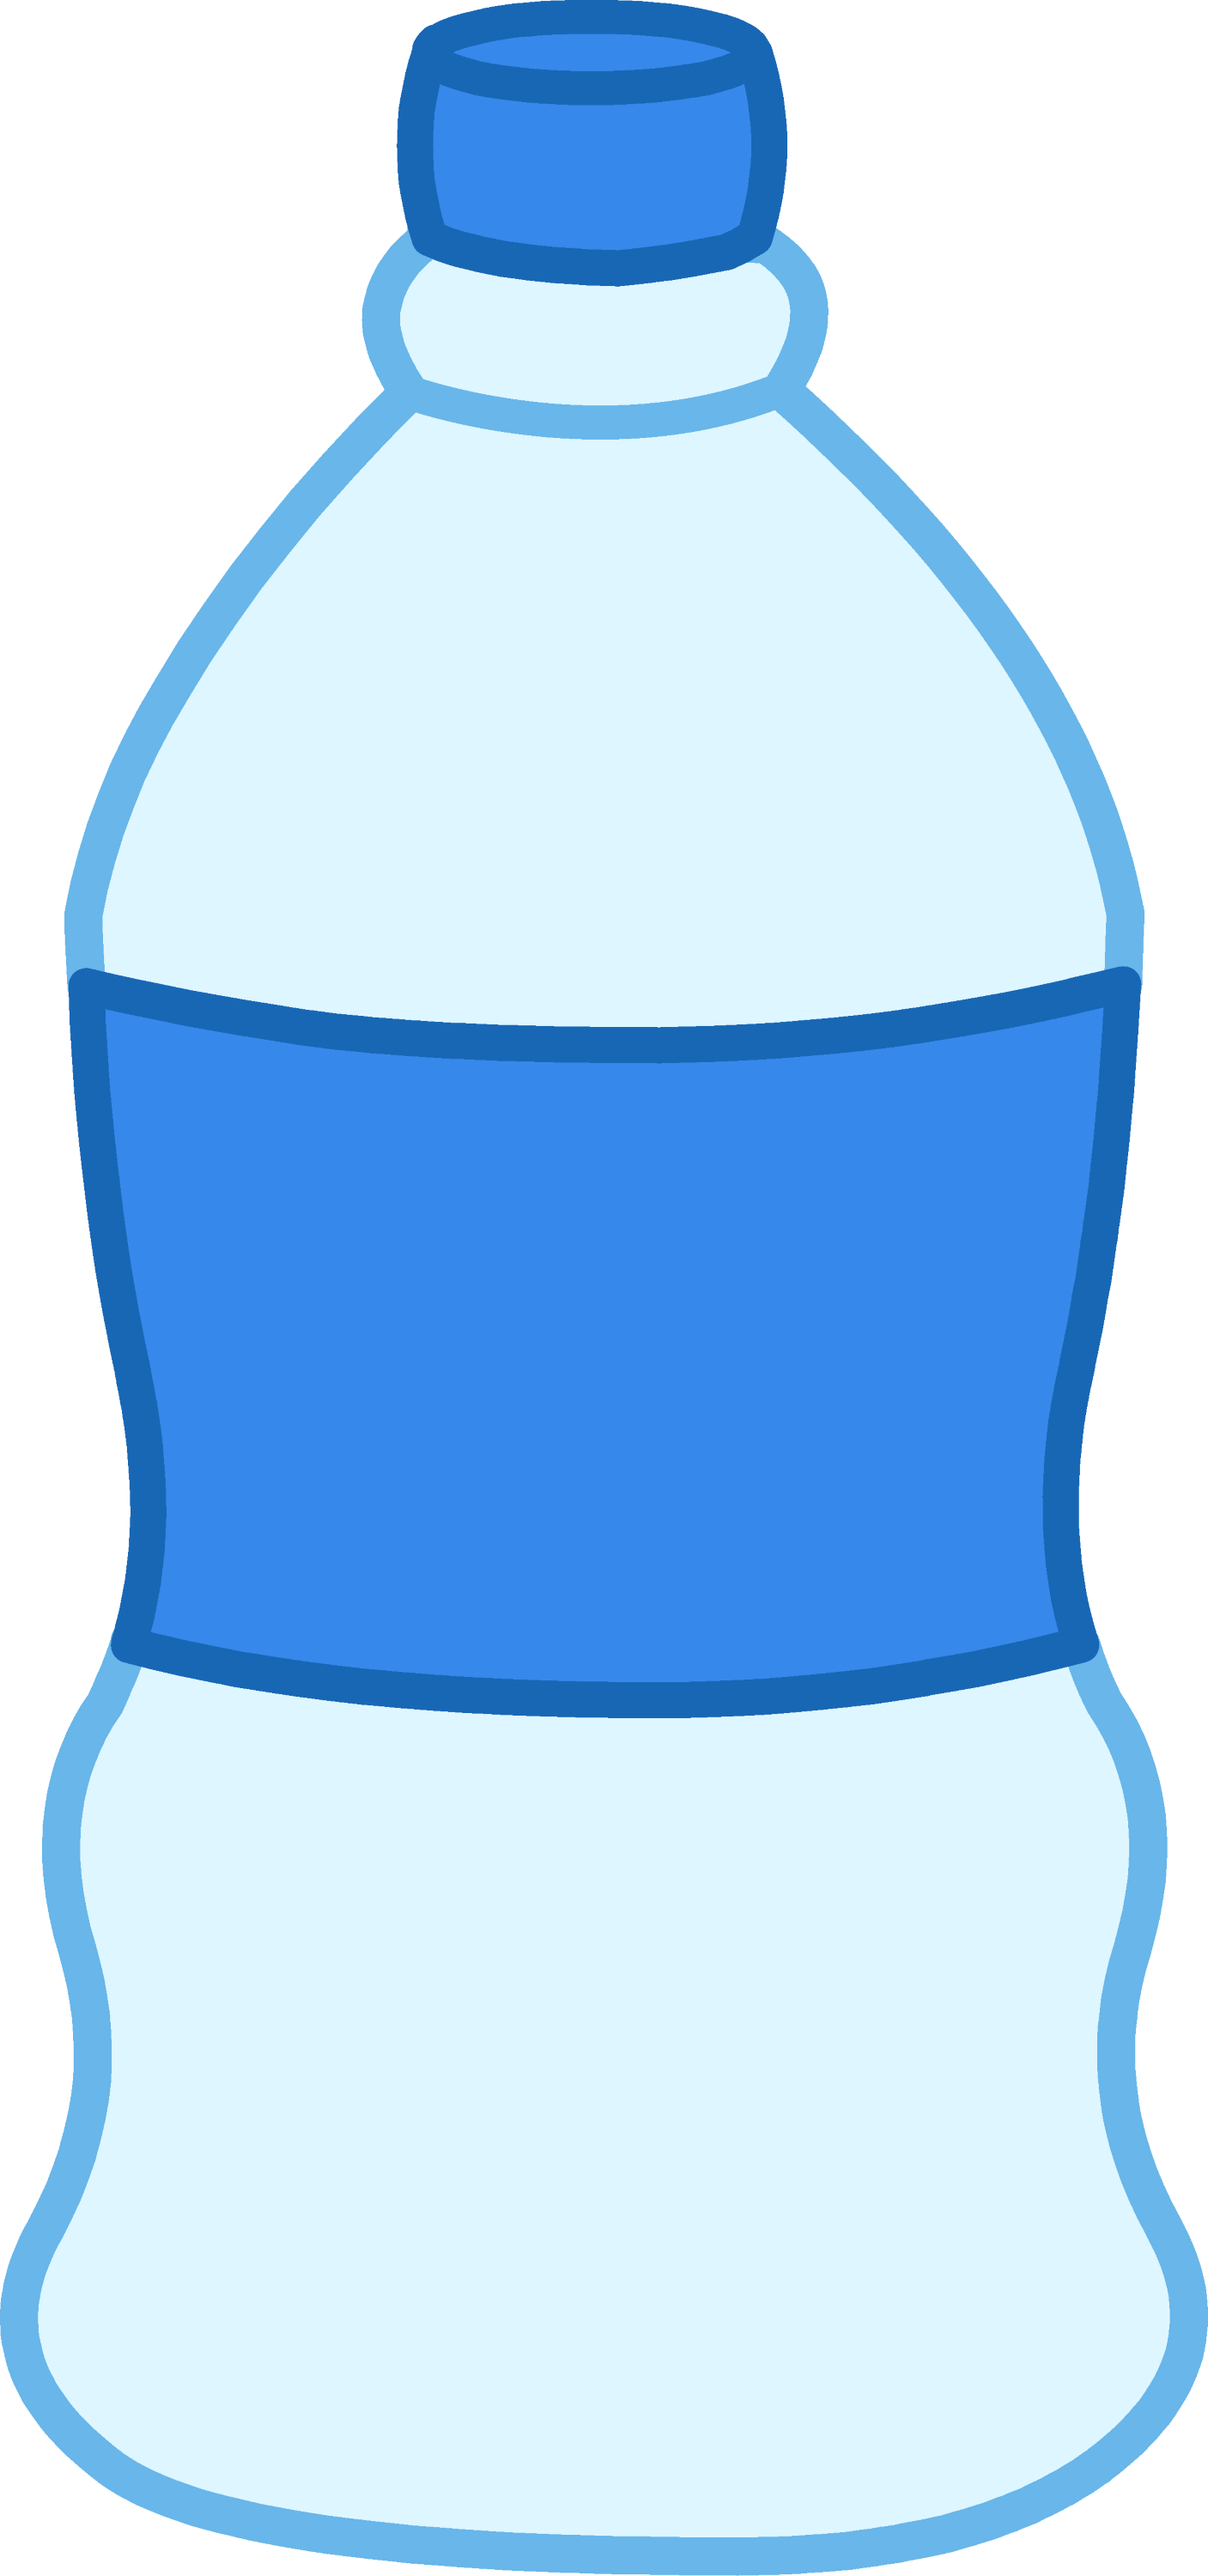 office clipart water bottle - photo #11